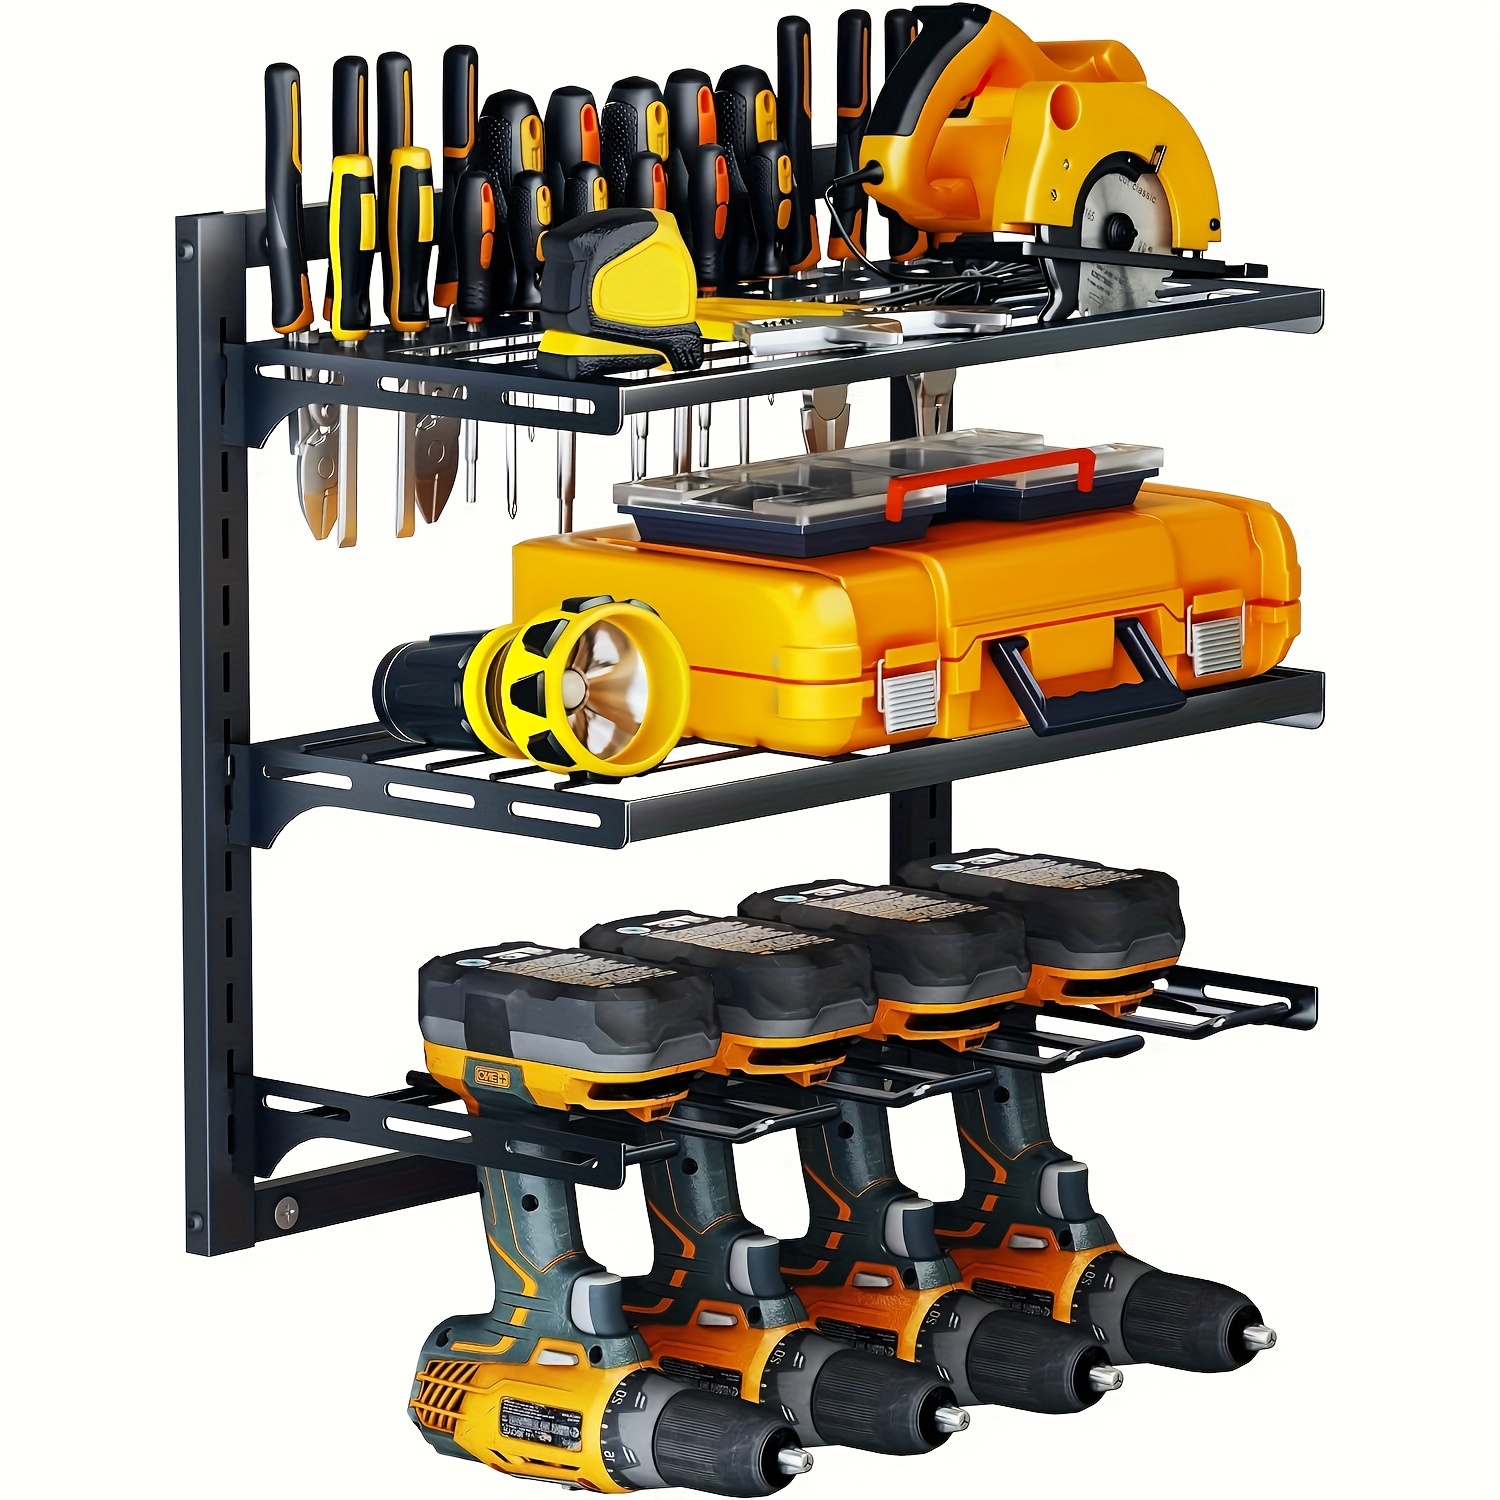 POWER TOOLS - Delmege Home Appliances and Power Tools